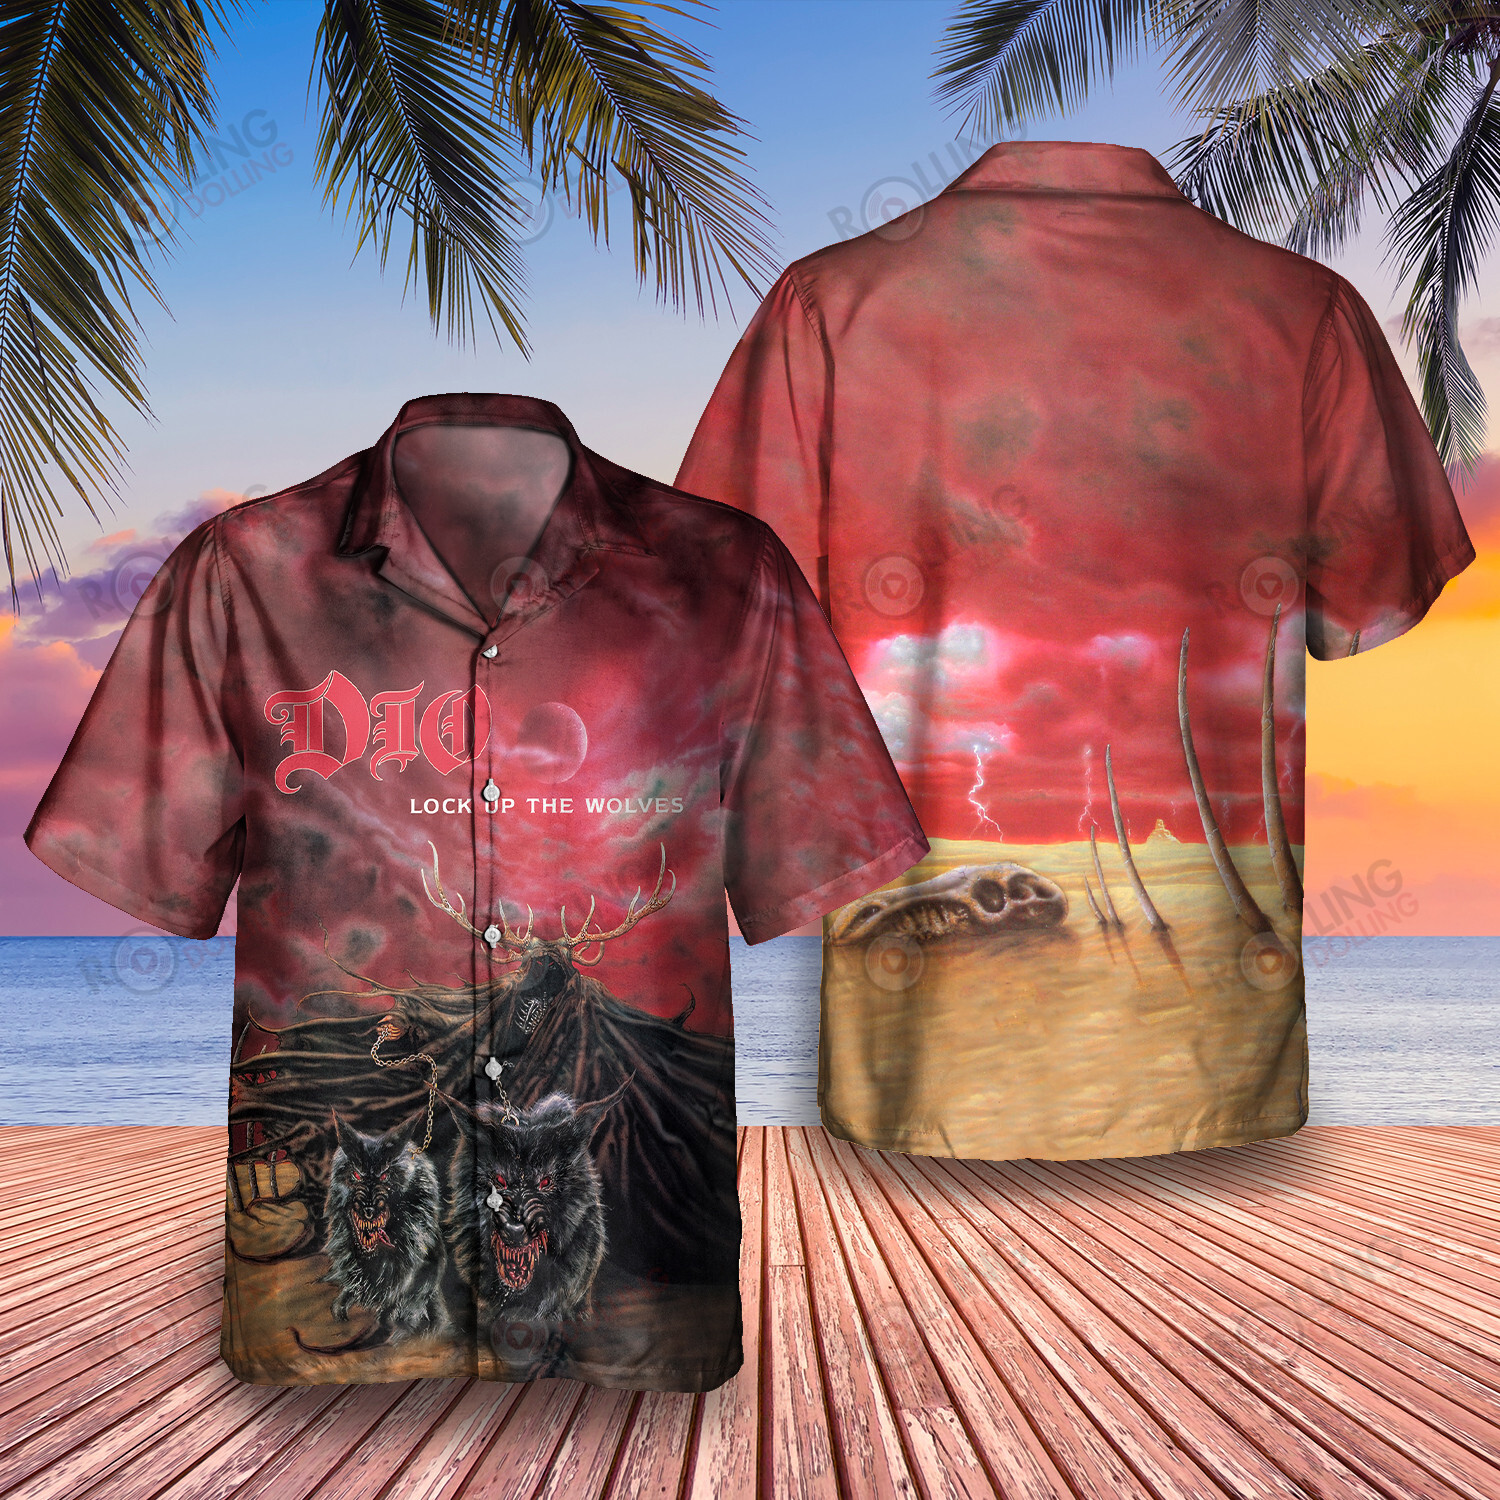 HOT Dio Lock Up the Wolves Album Tropical Shirt2